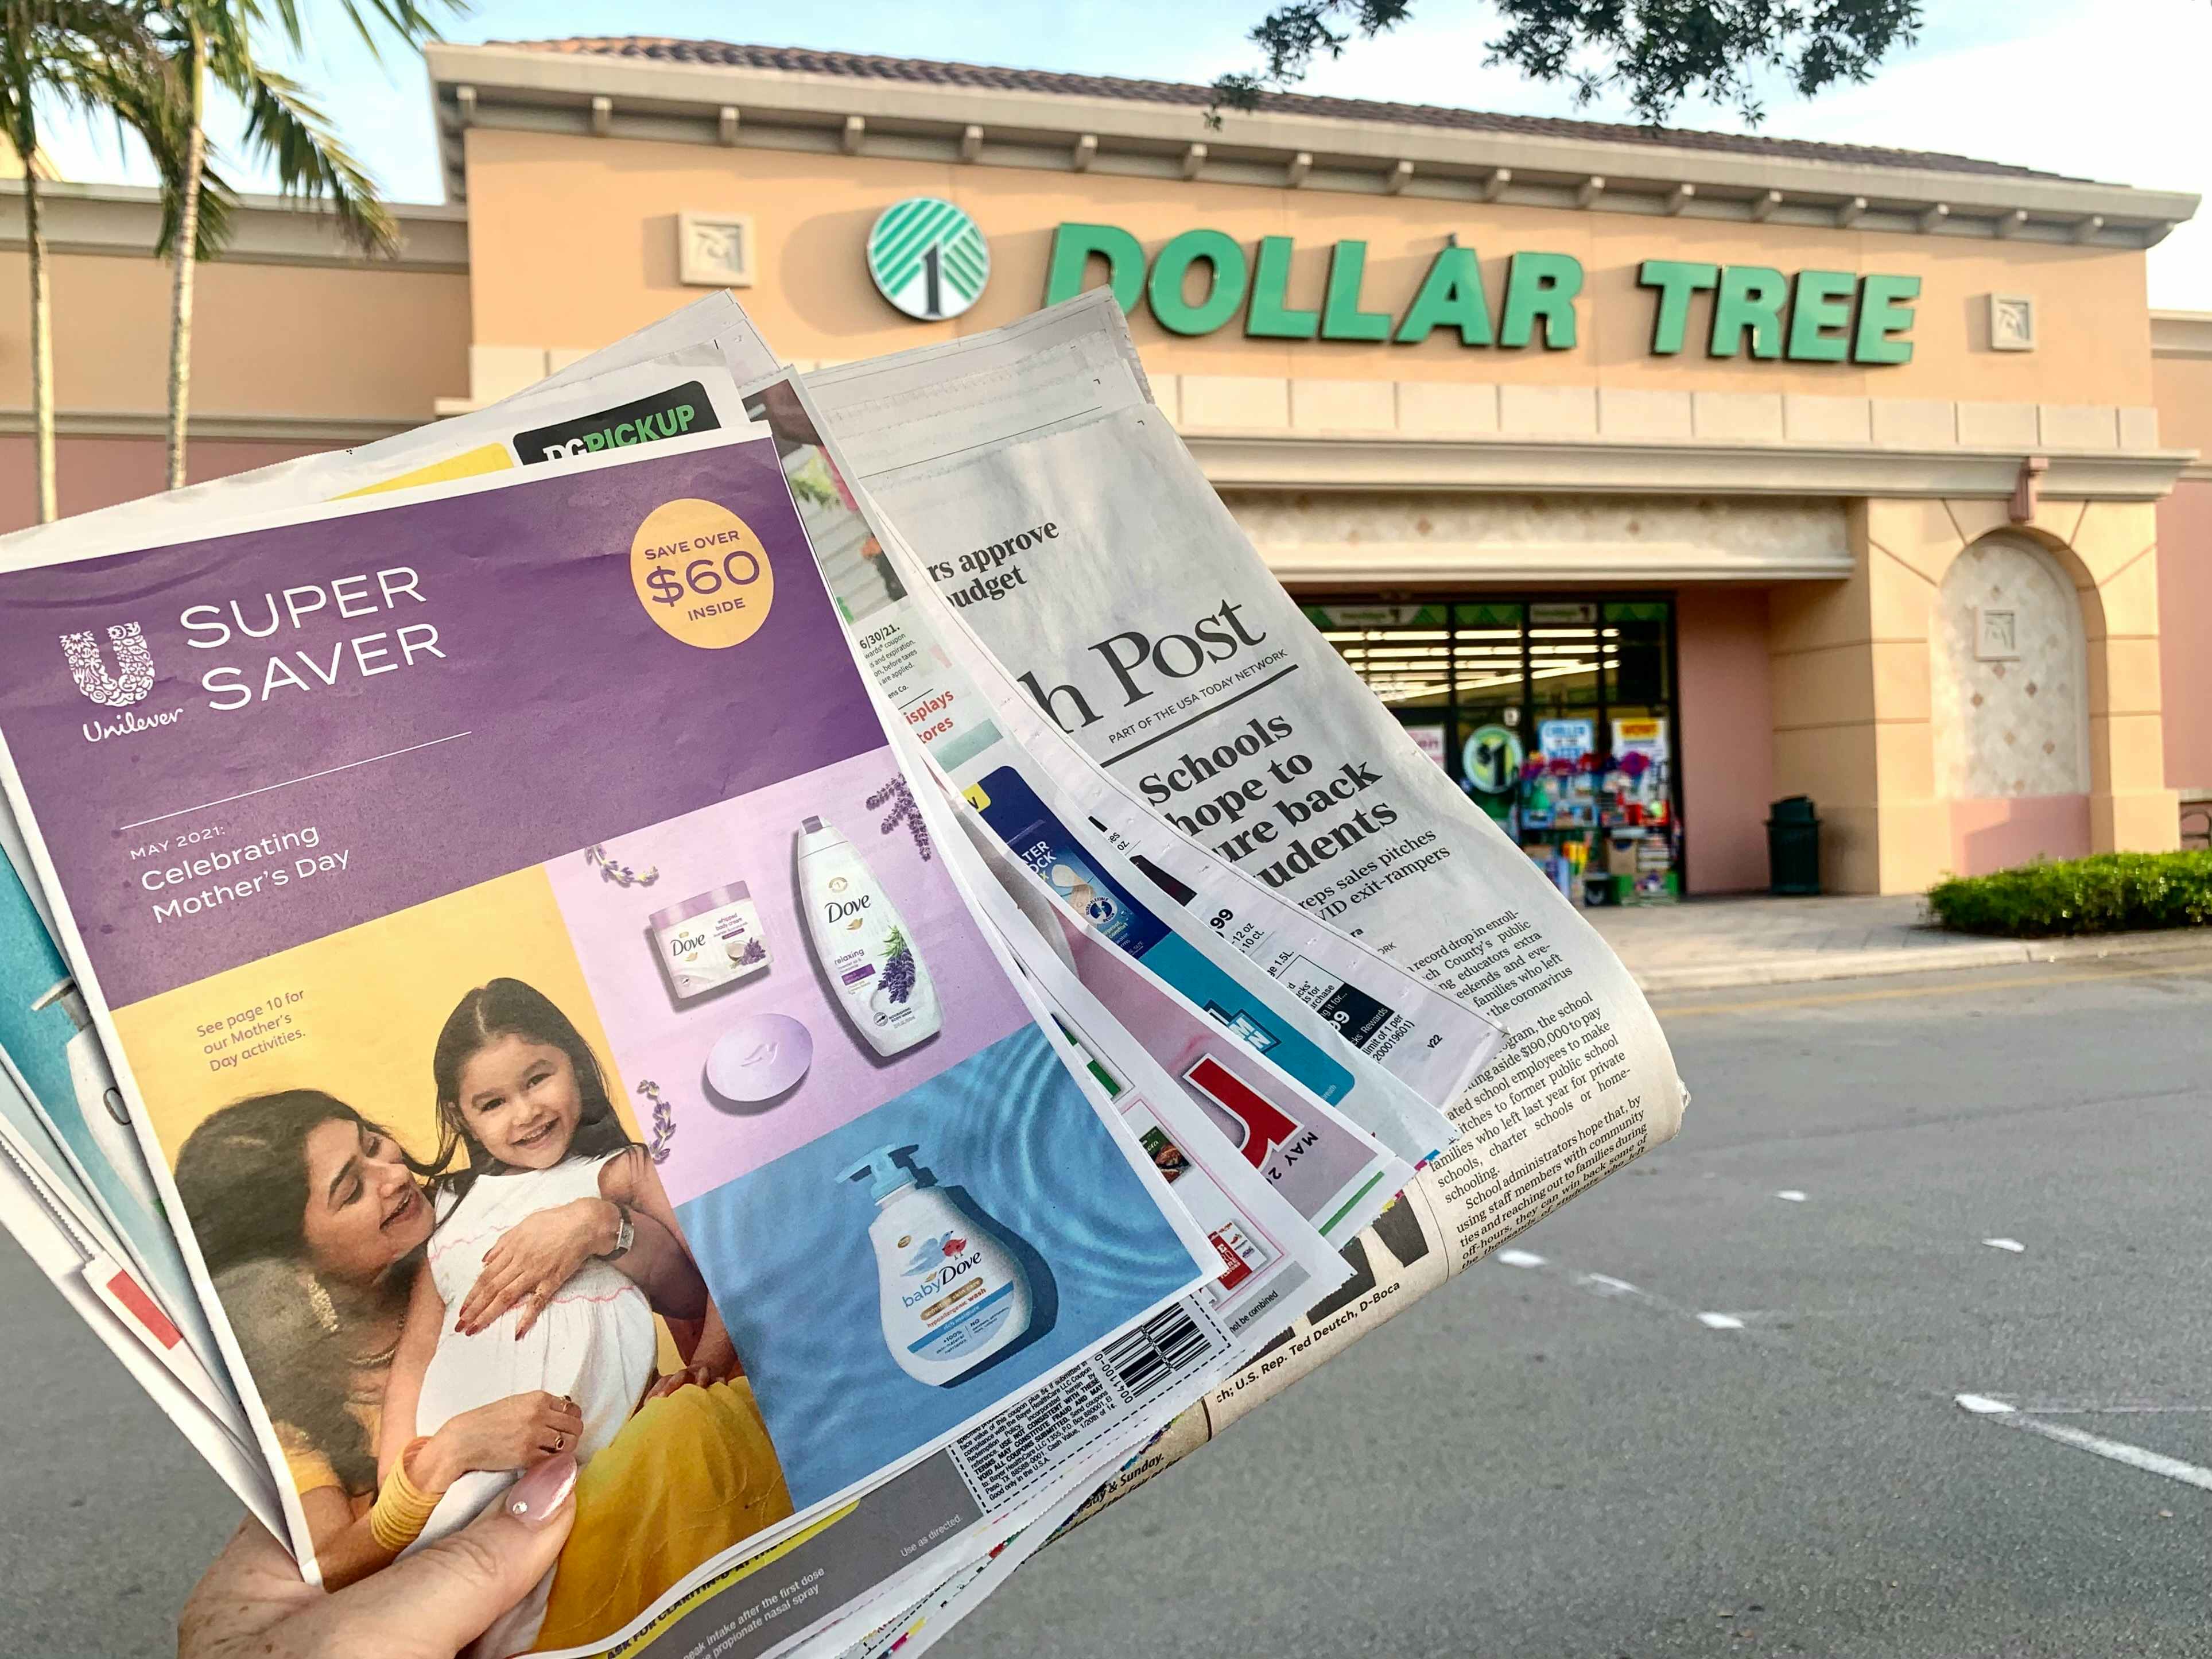 A person's hand holding a stack of coupon leaflets and a newspaper in front of a Dollar Tree storefront.